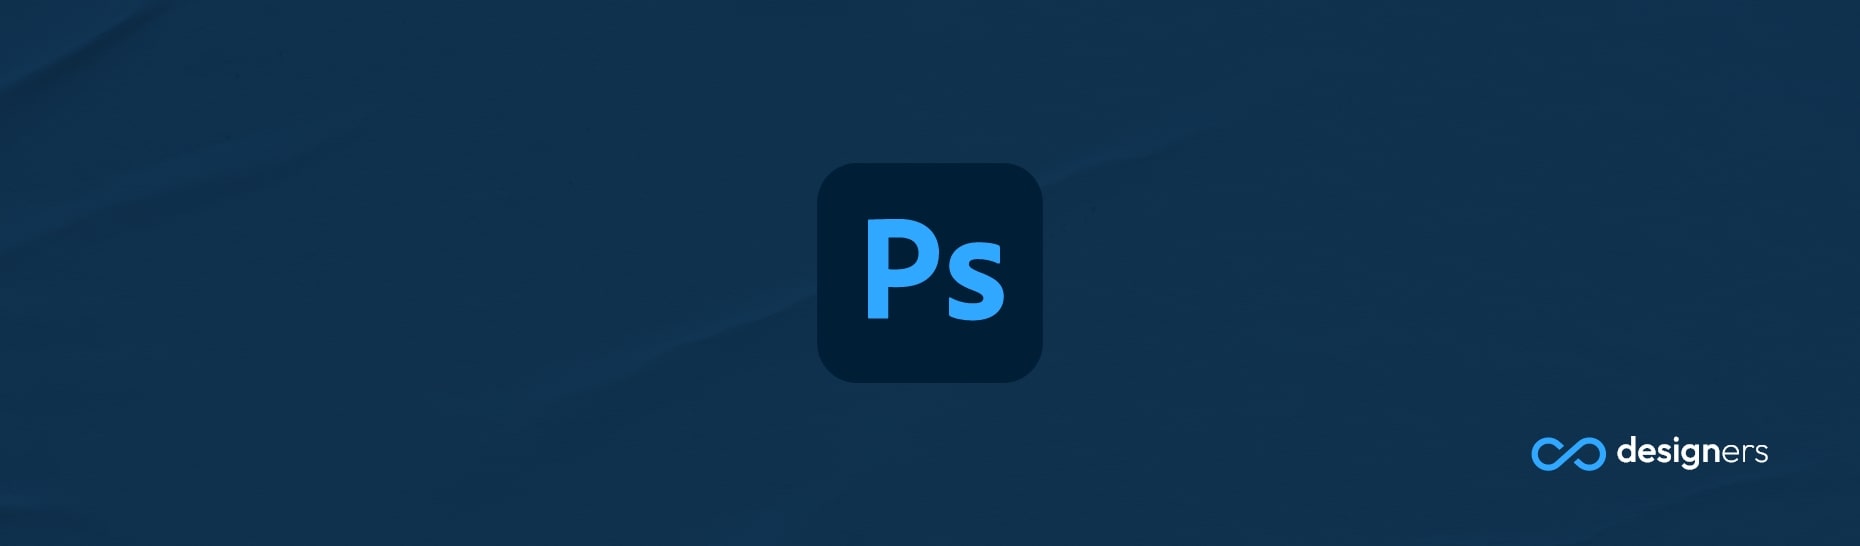 How do you make a blurry picture clear in Photoshop?